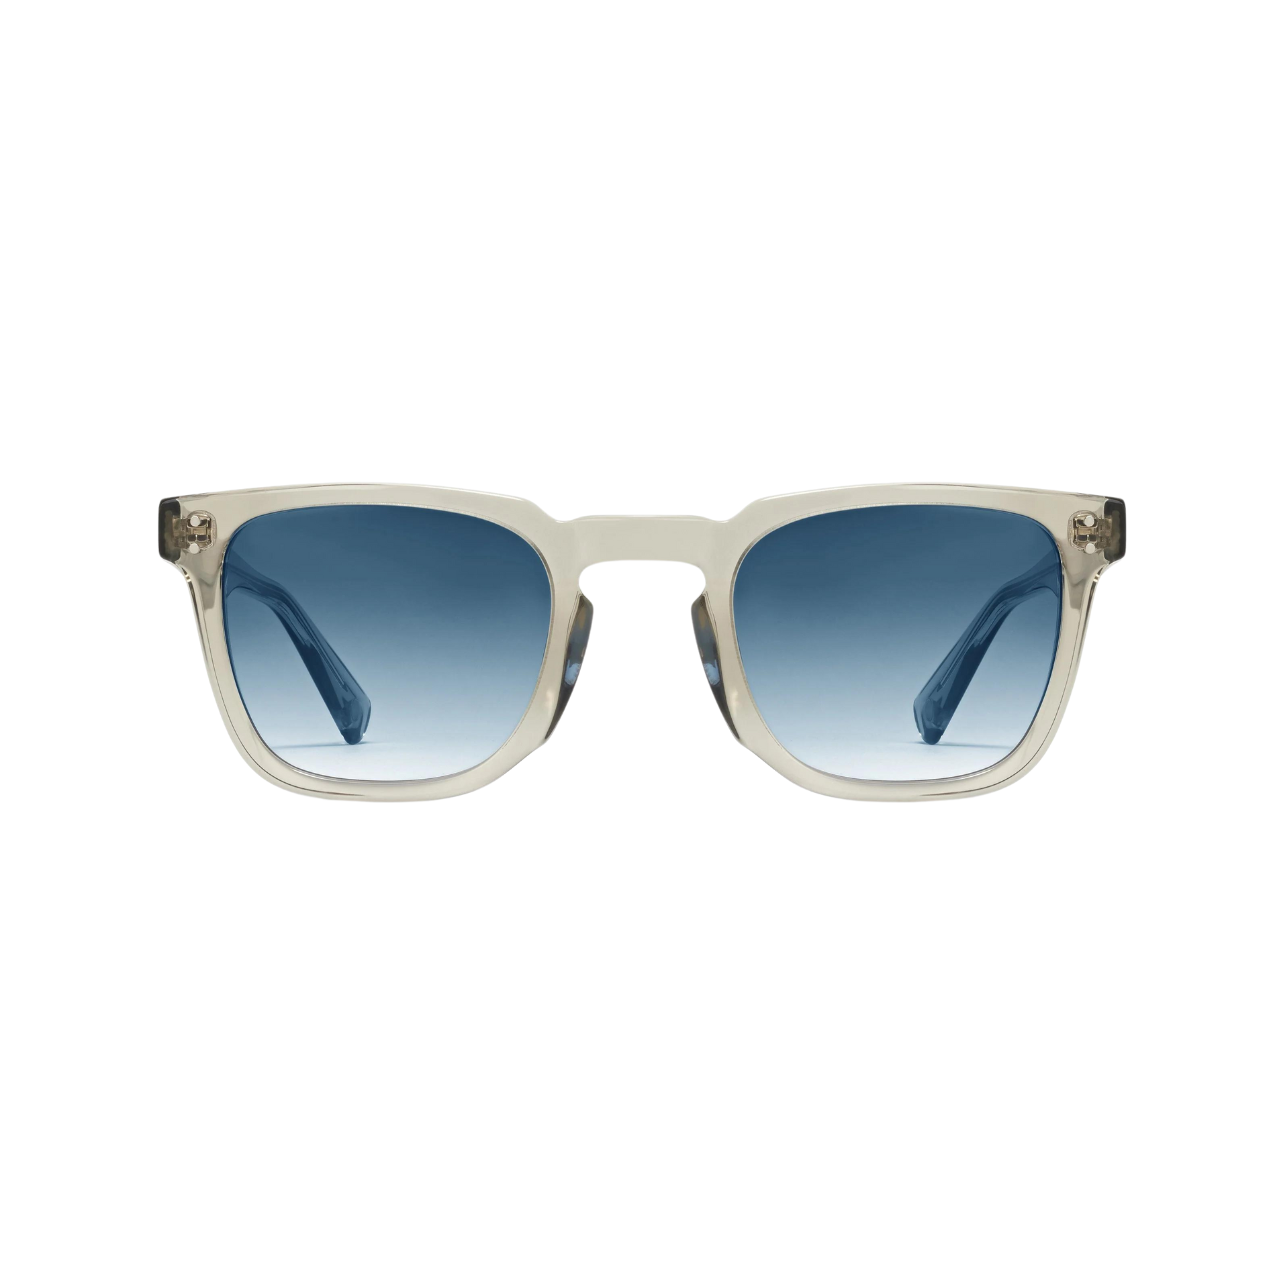 Morgenthal Fredericks Hughes sunglasses in silver frames with blue tinted lenses